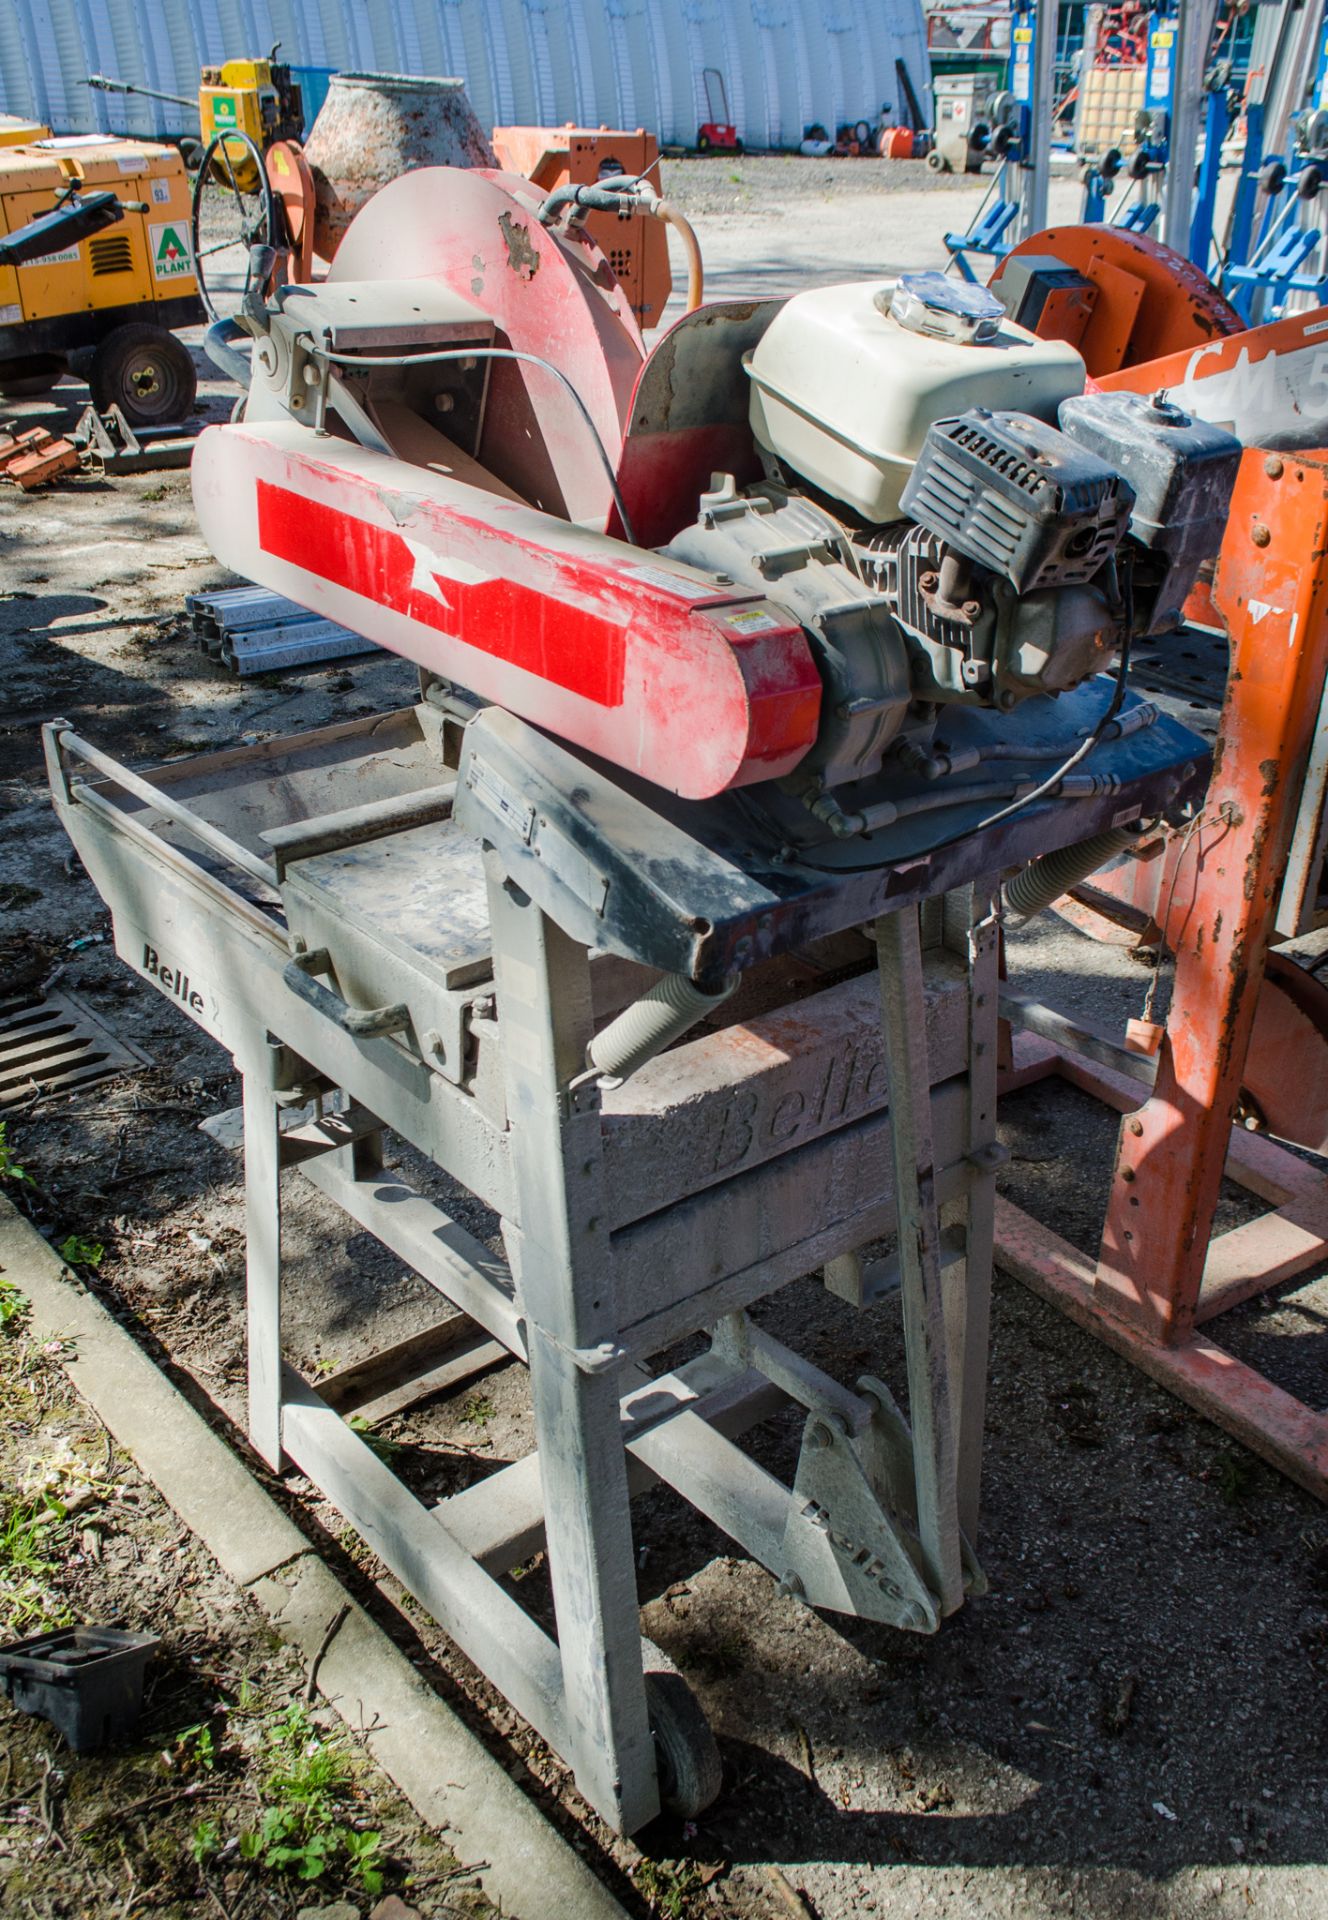 Belle MS521 petrol driven site chop saw Year: 2016 BEL-0369 - Image 2 of 3